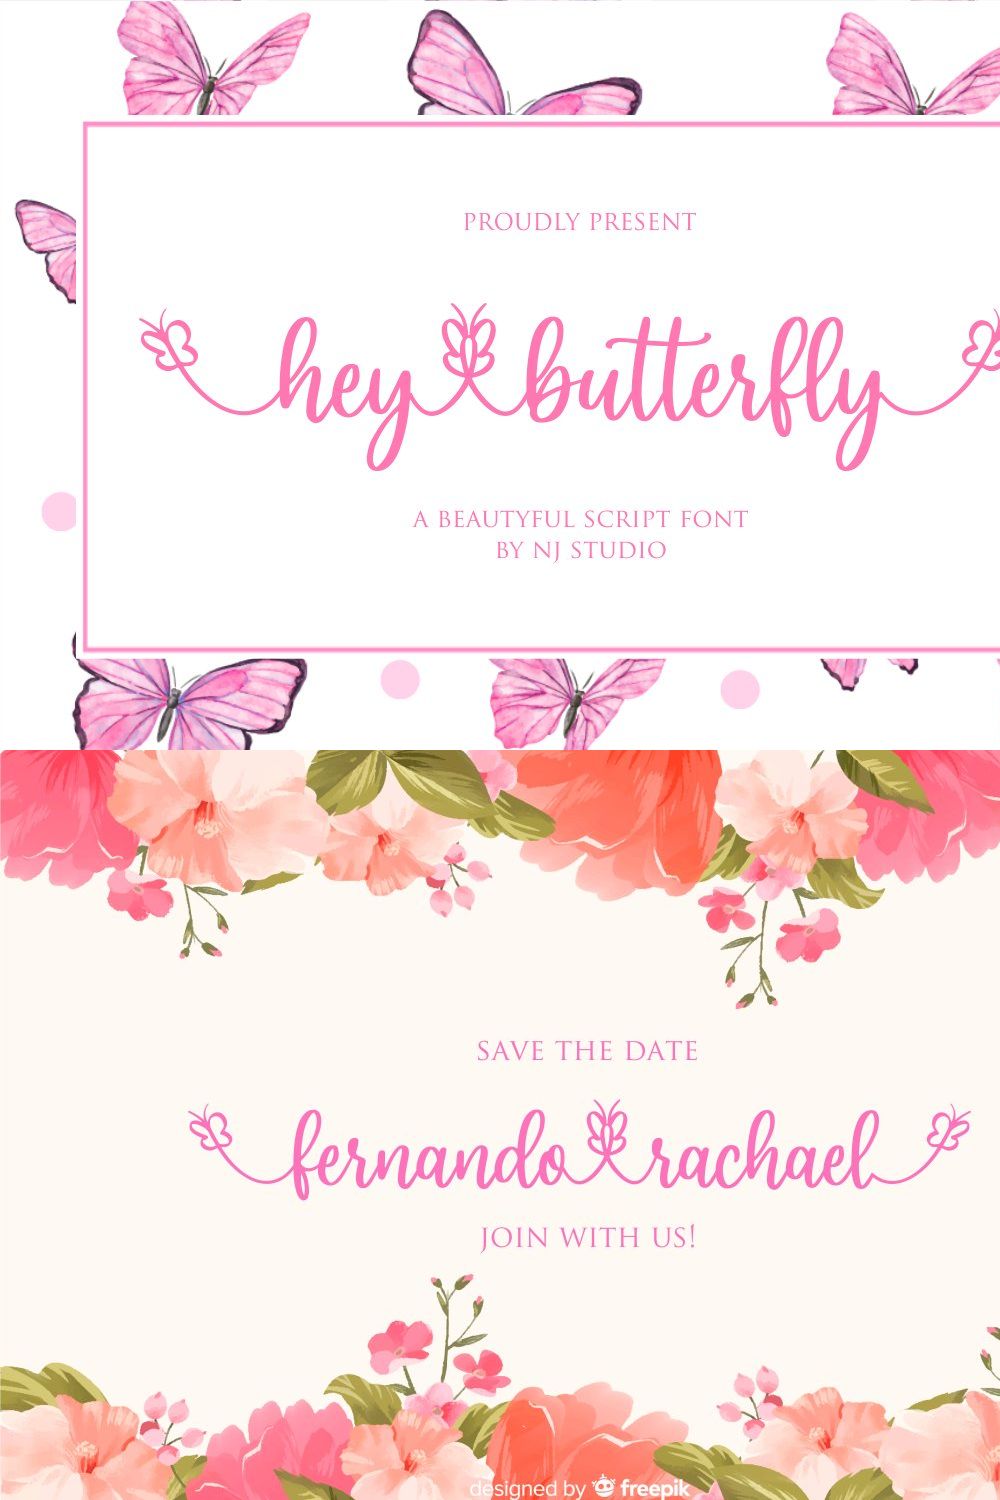 hey butterfly pinterest preview image.